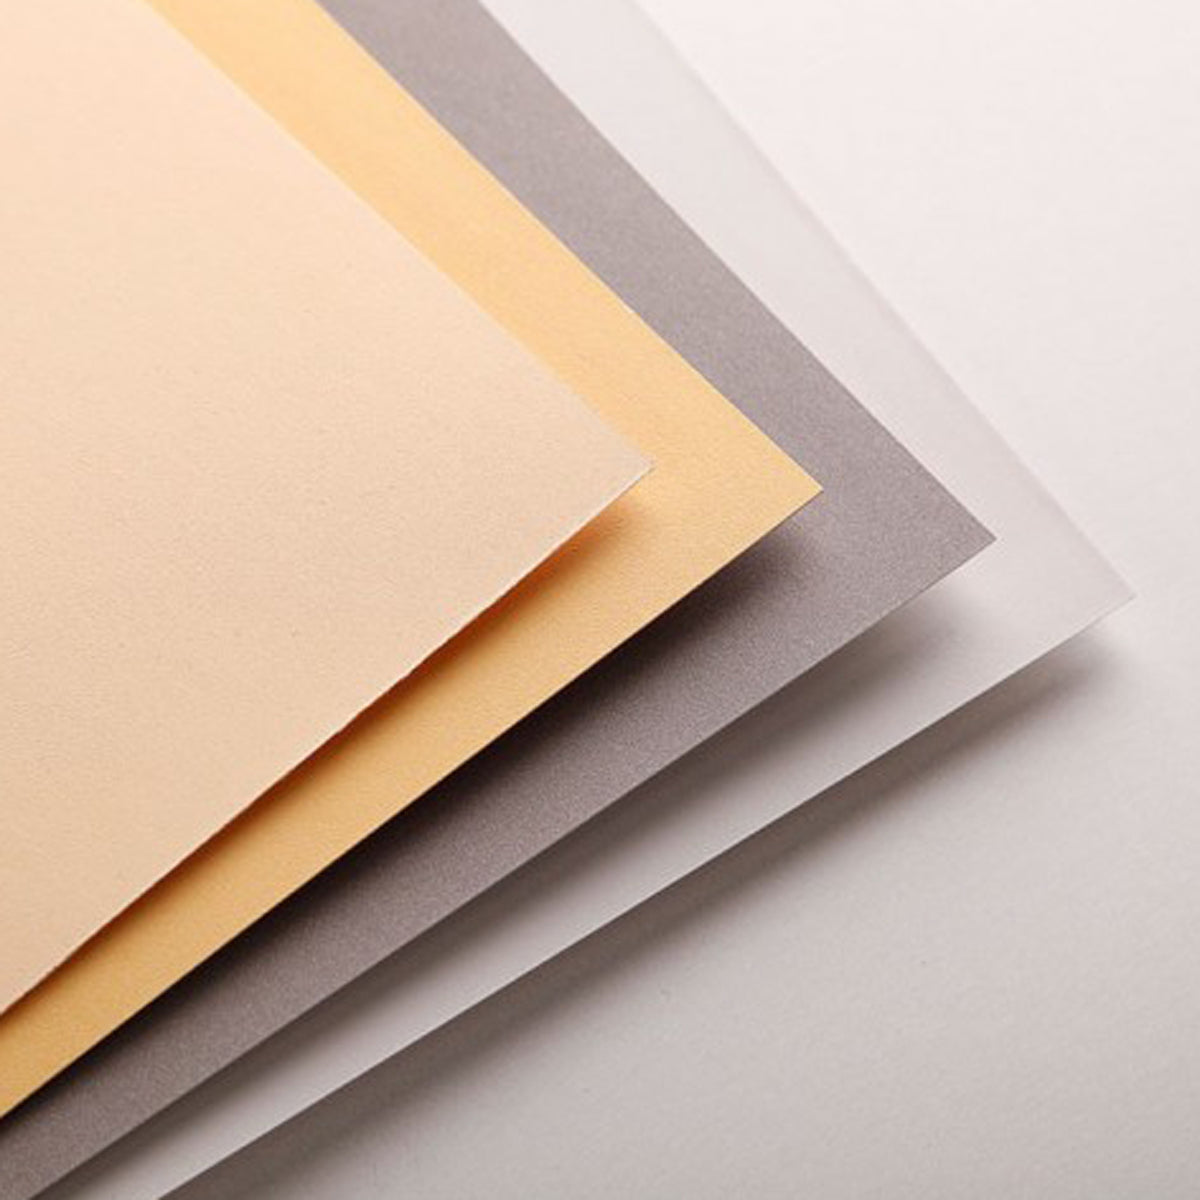 Clairefontaine Pastelmat Paper Sheets, Mountboard & Pads